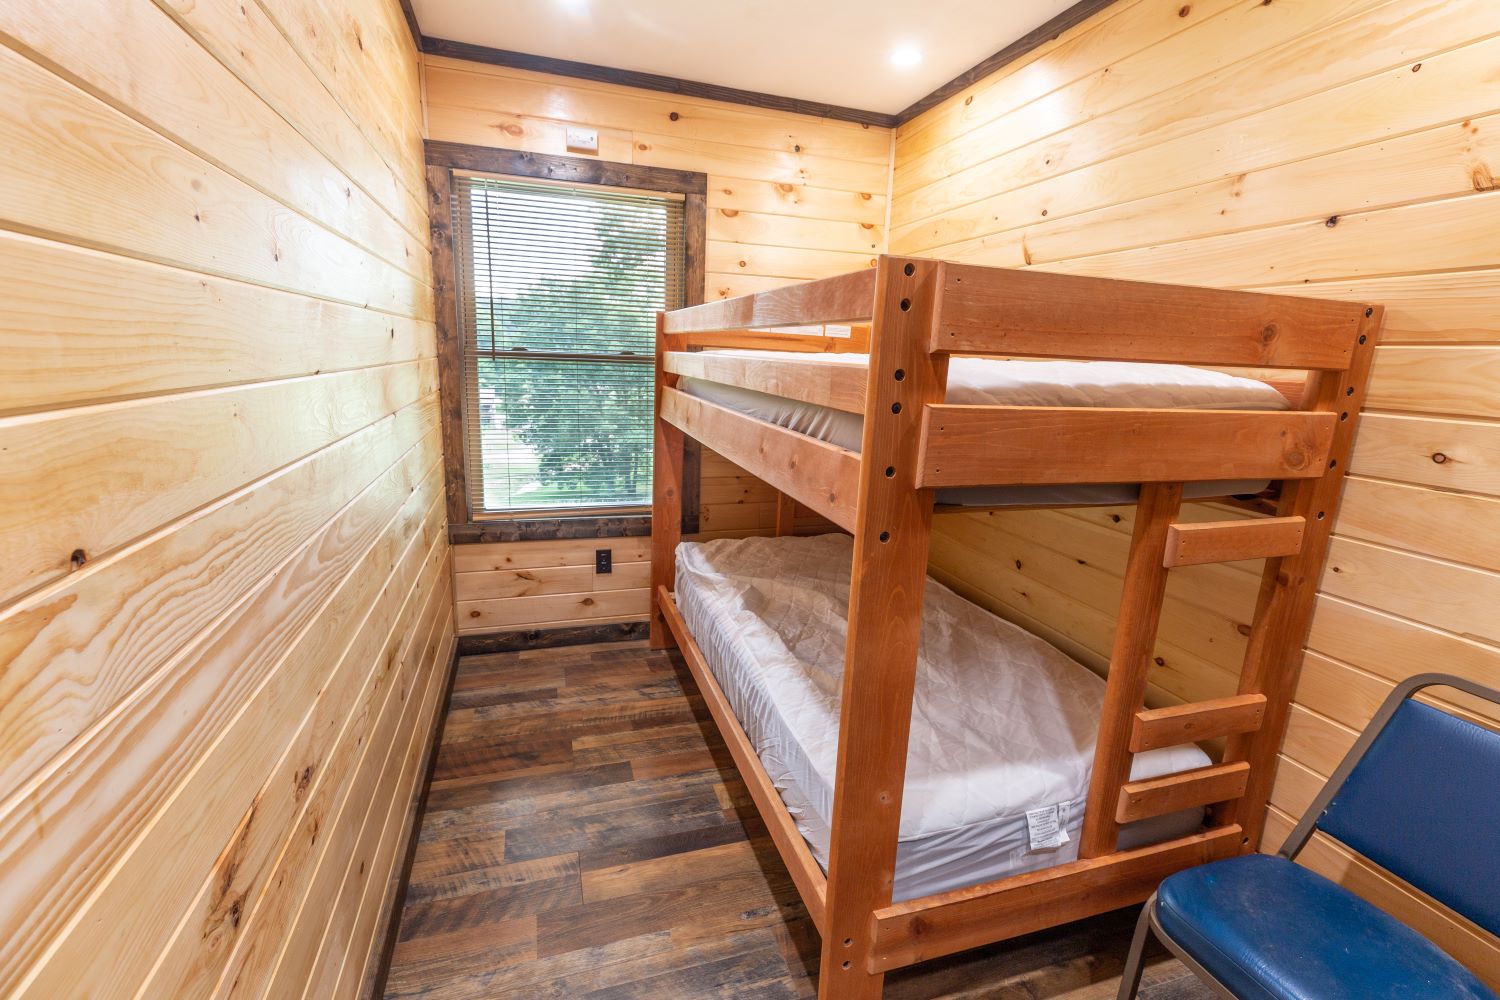 image of bunk beds in small room at bunkhouse cabin